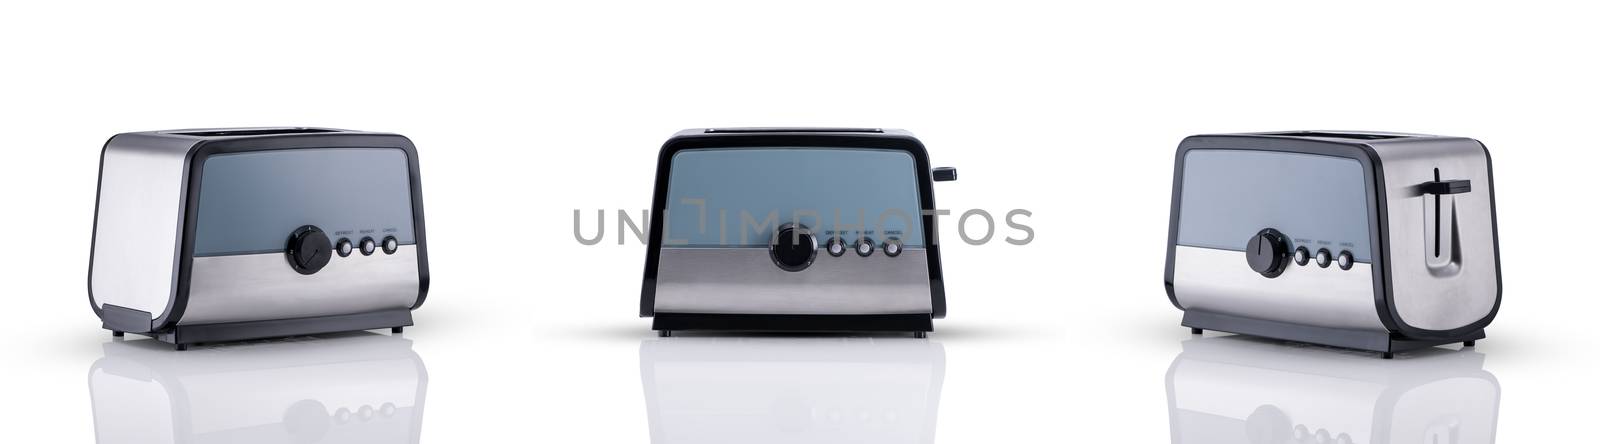 kitchen toaster on a white background with reflection, three angles of view. kitchen accessories